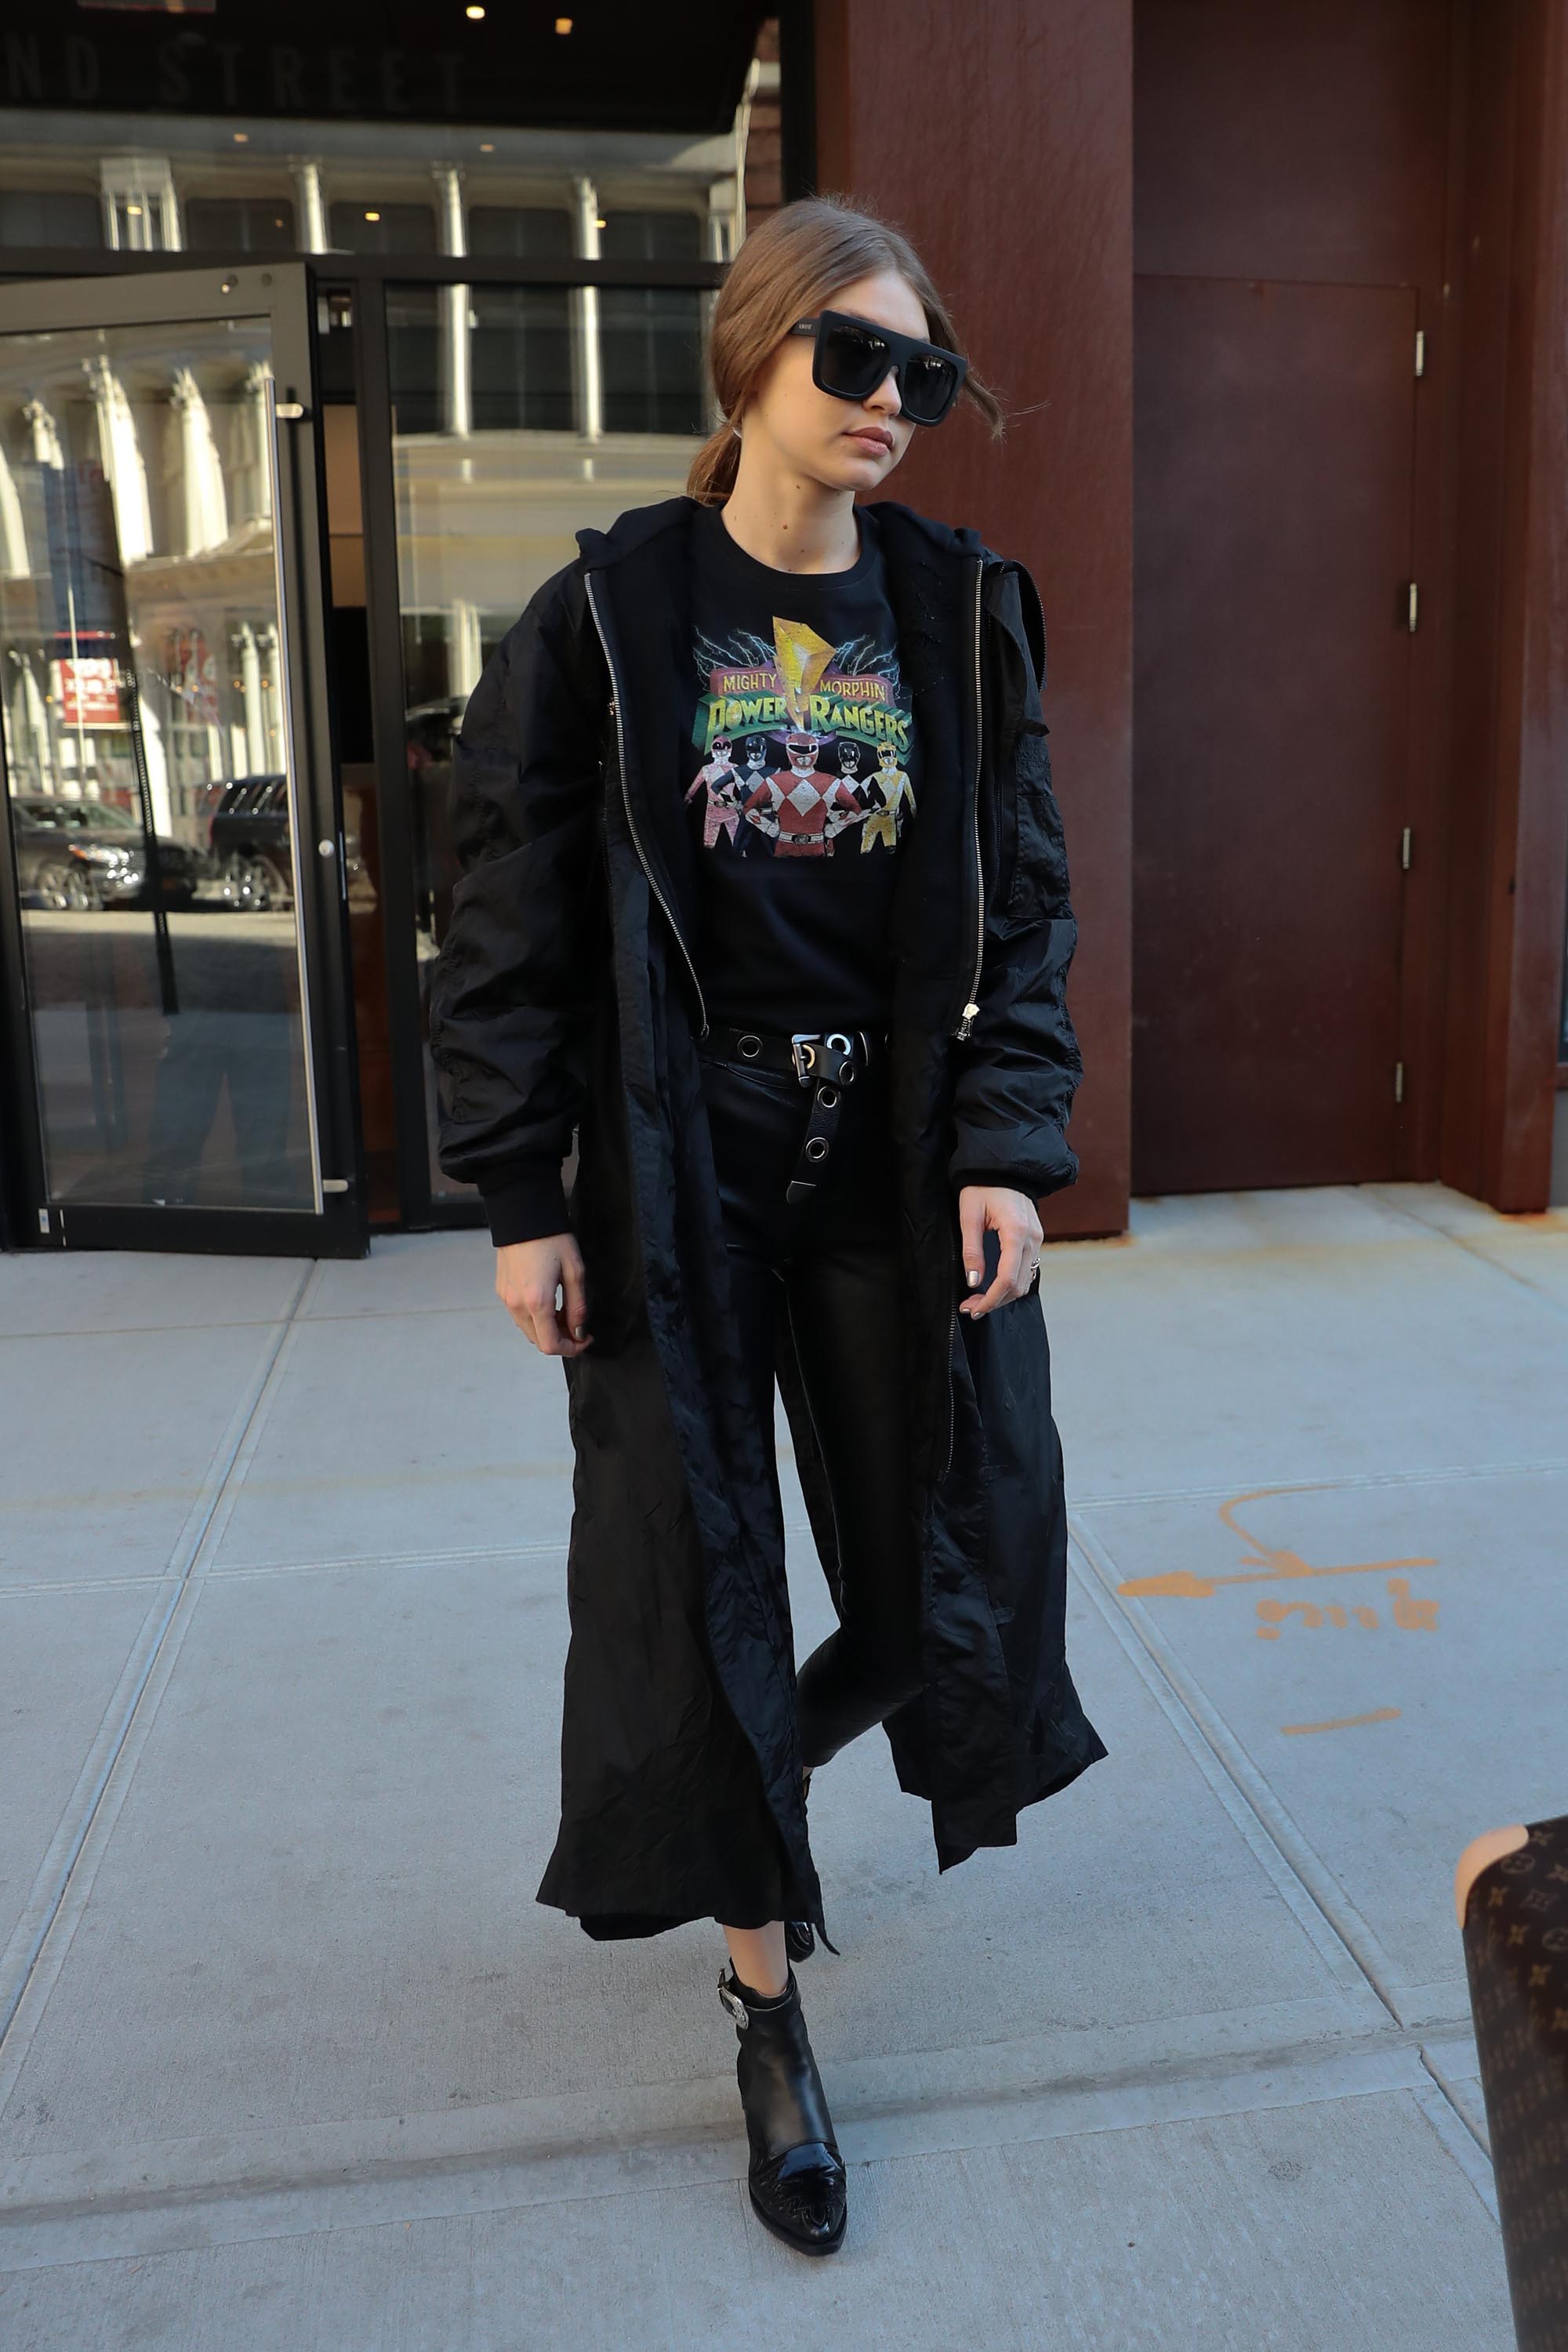 Gigi Hadid leaving her apartment in NYC